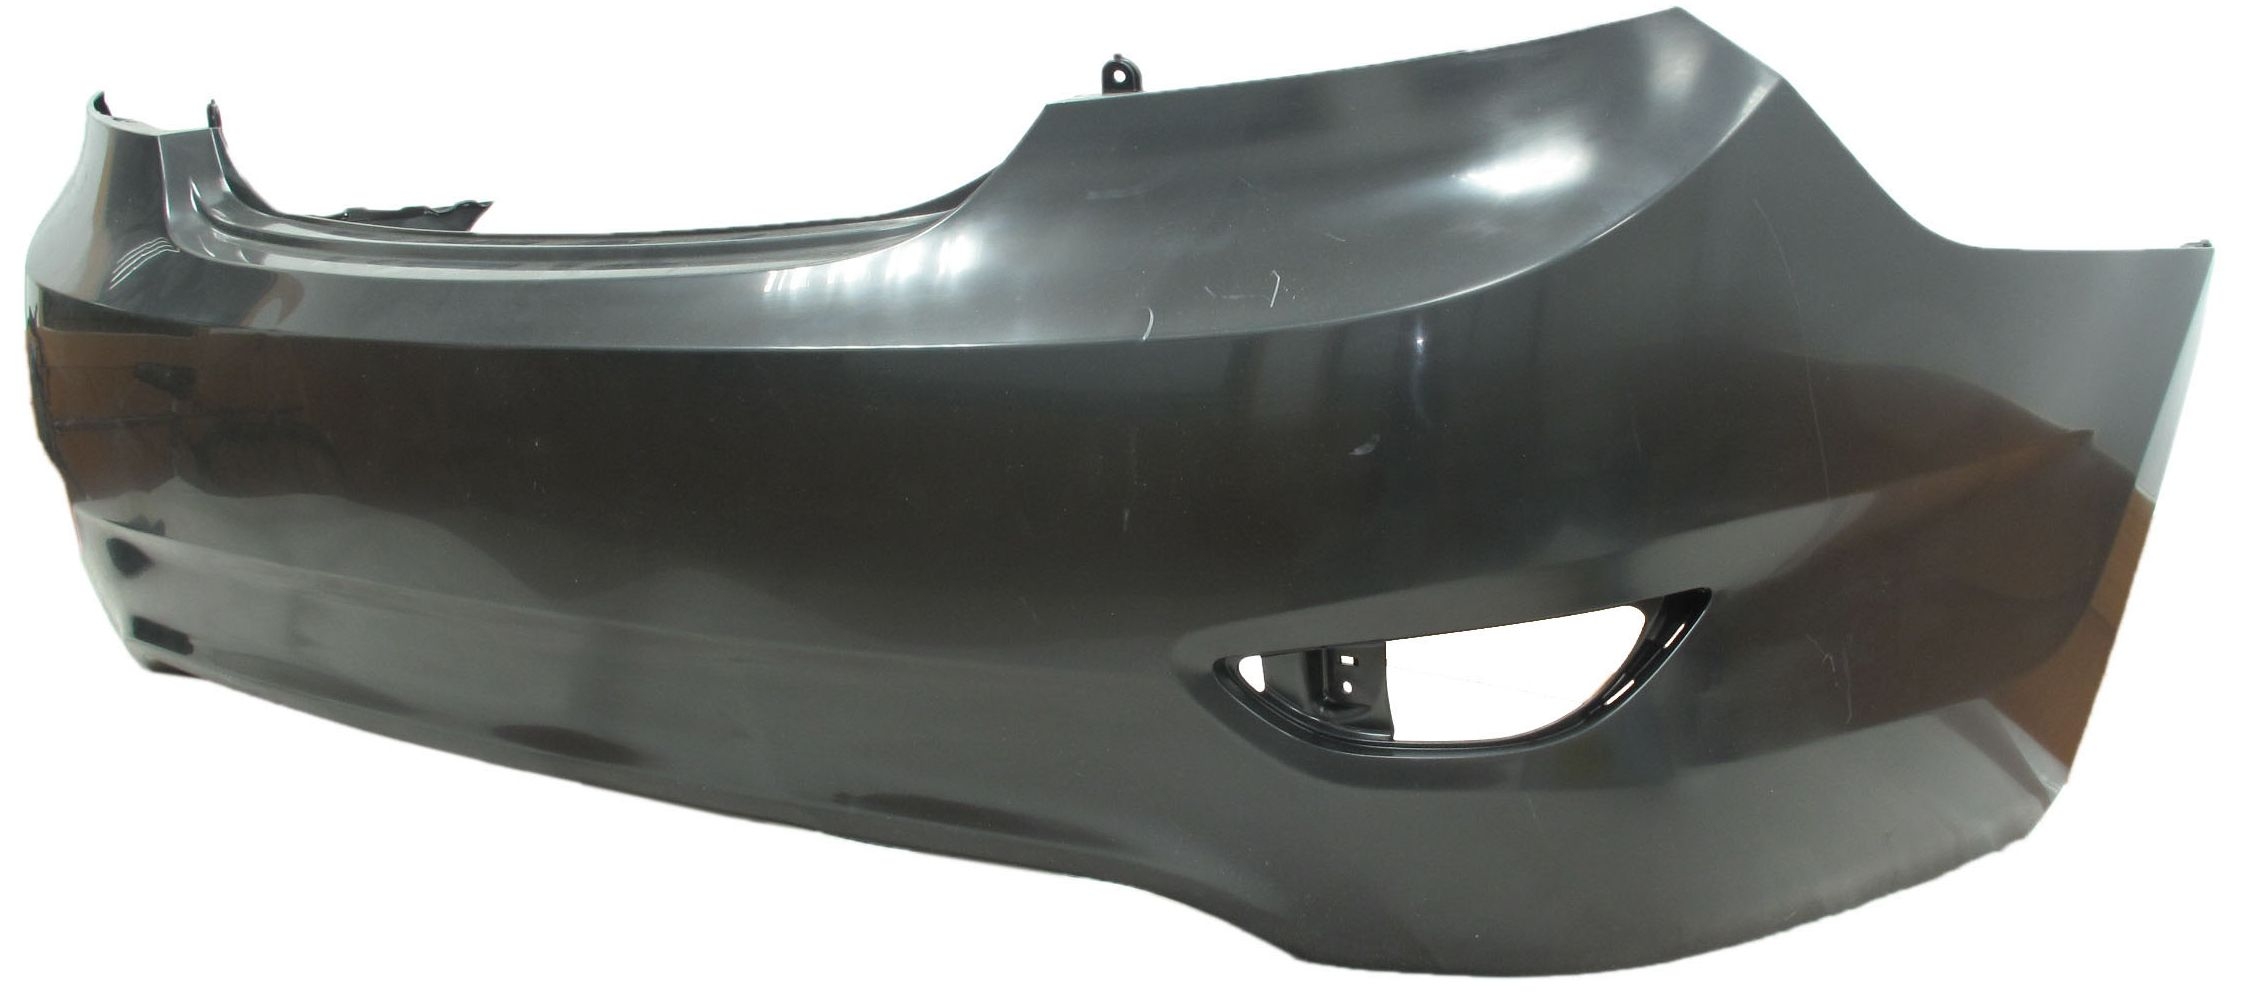 ACCENT 12-15 Rear Cover Sedan Without Sensor Hole CAPA